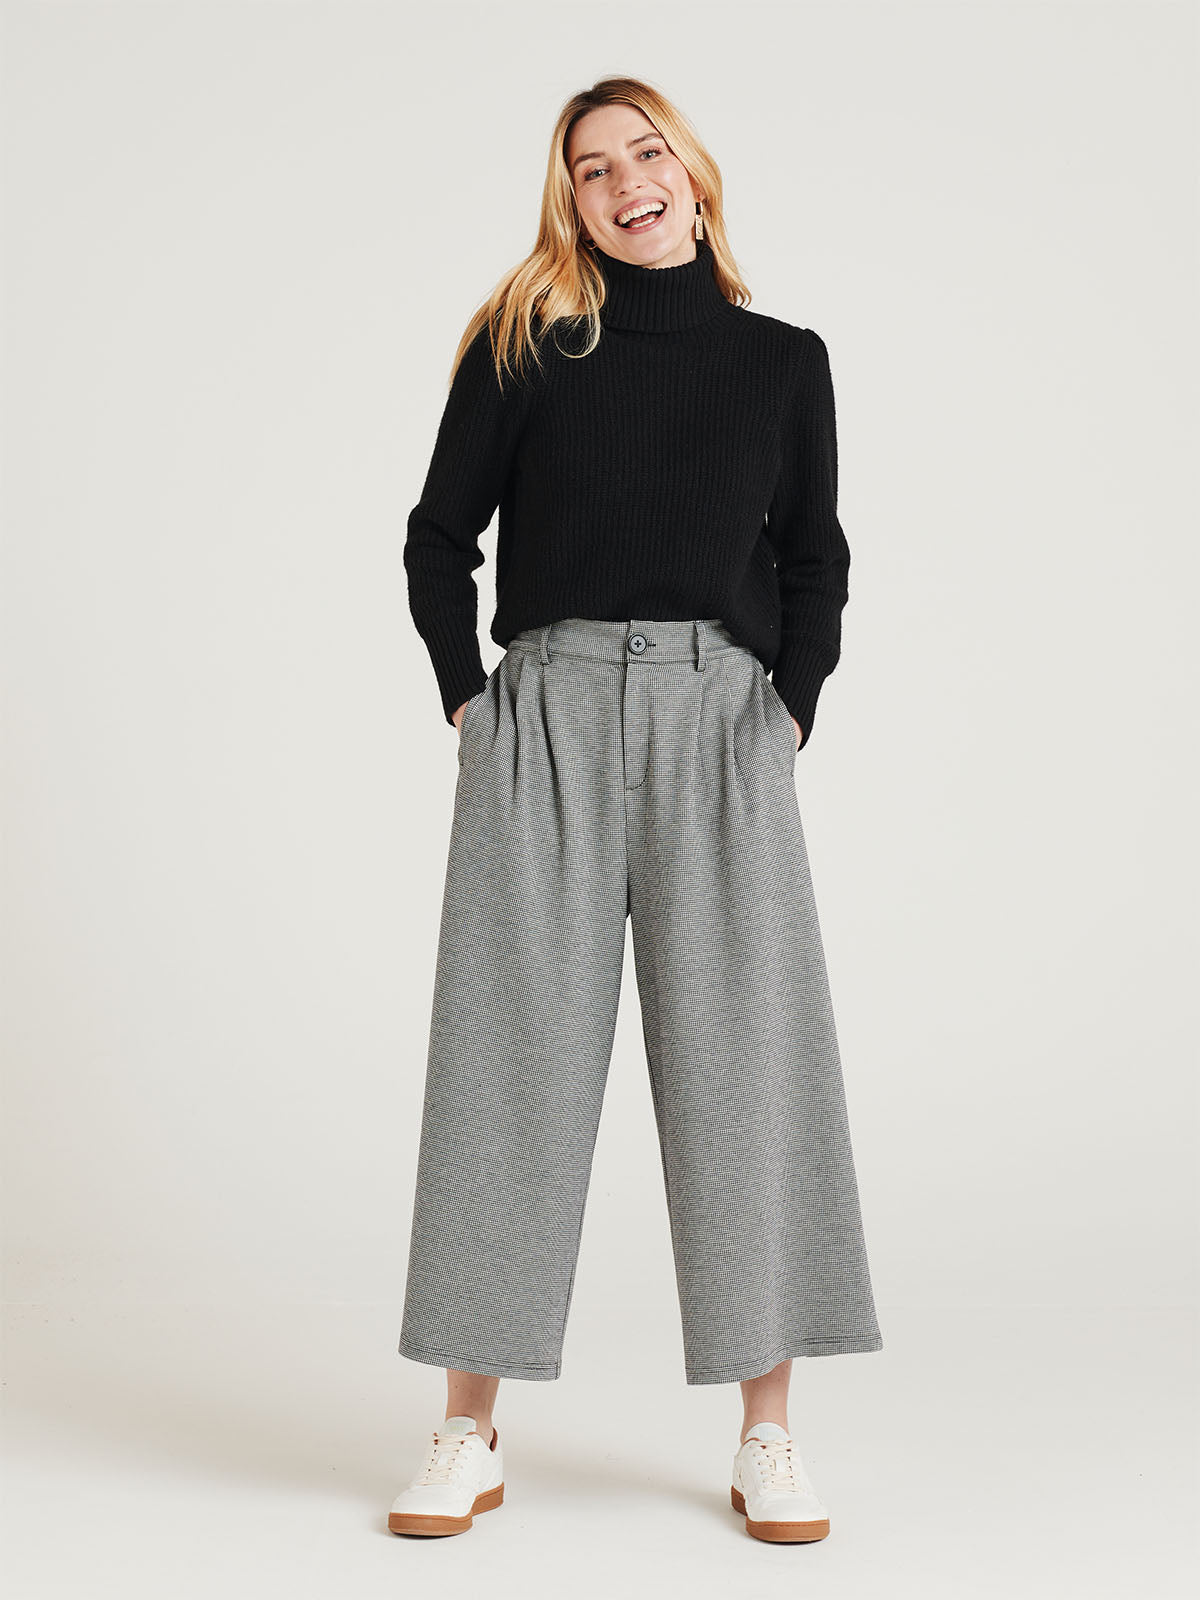 Women's Basic Solid Black High Waisted Jersey Culottes | Boohoo UK